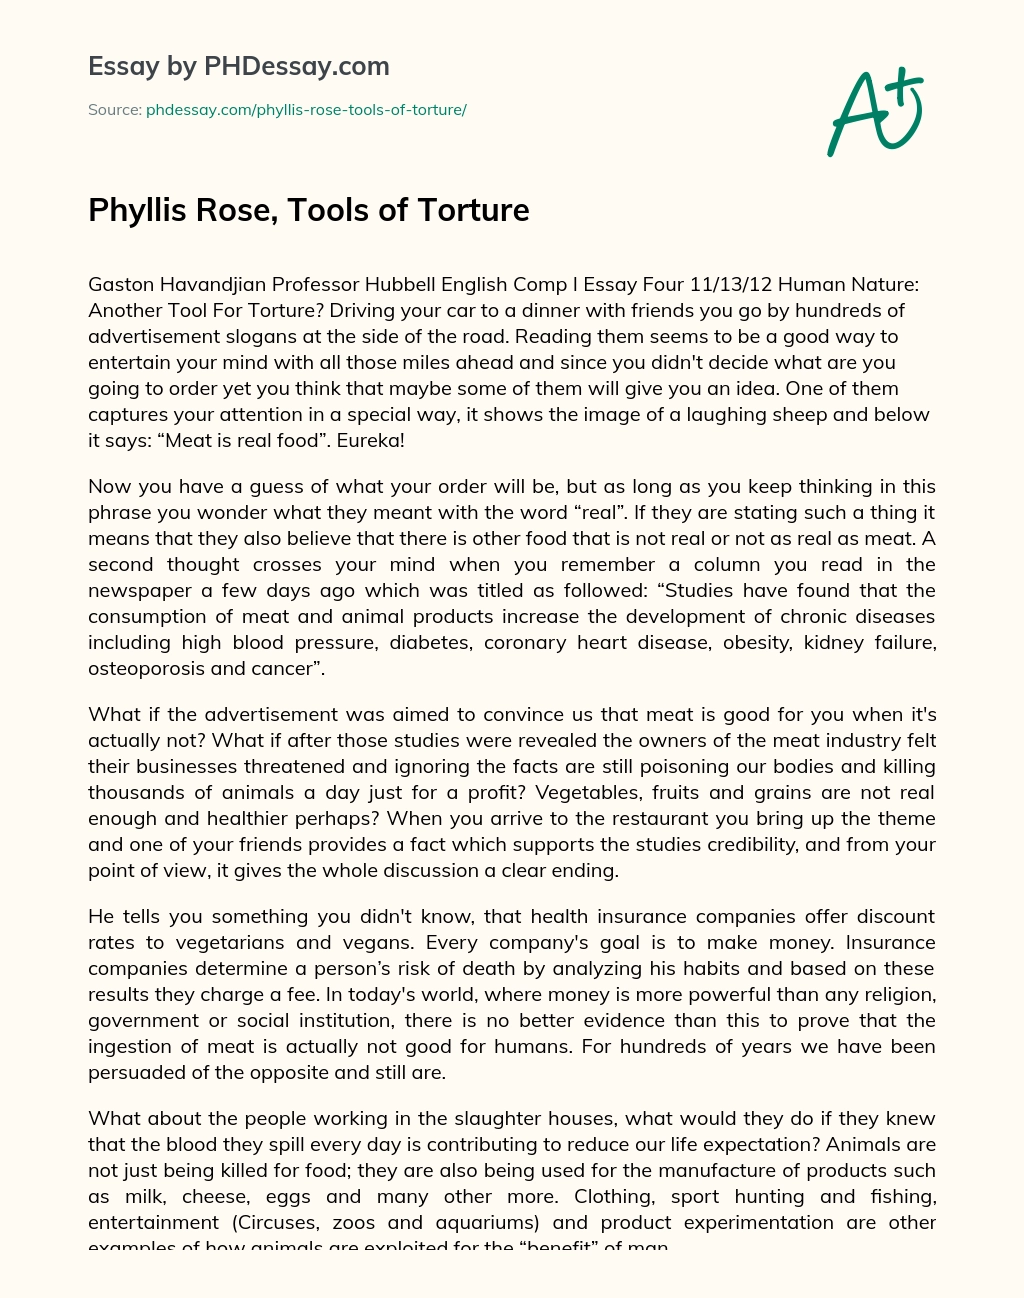 Phyllis Rose, Tools of Torture essay